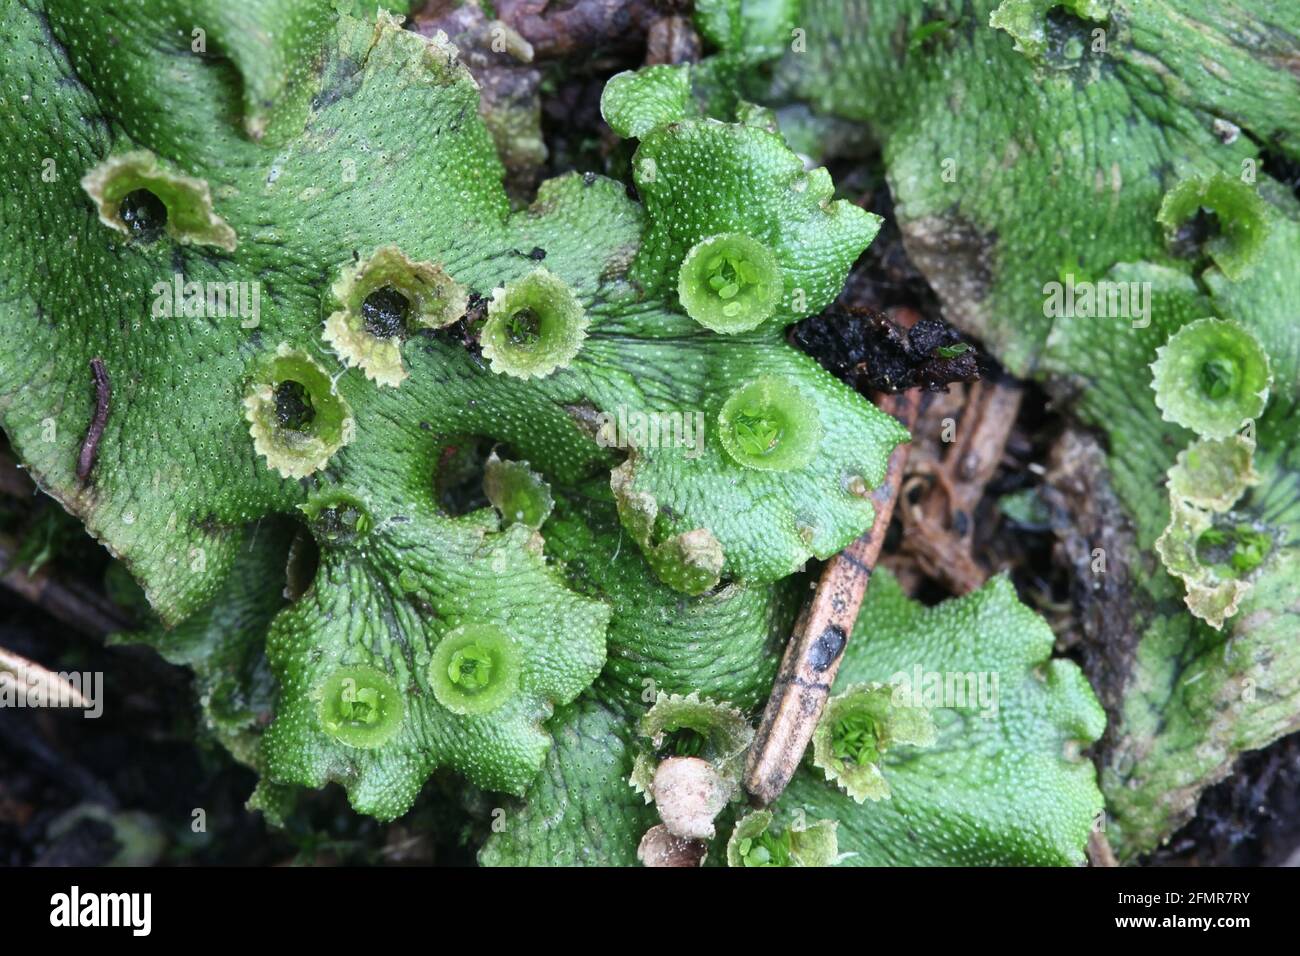 Marchantia polymorpha ssp ruderalis, known as the common liverwort or umbrella liverwort, growing on a forest fire area in Finland Stock Photo